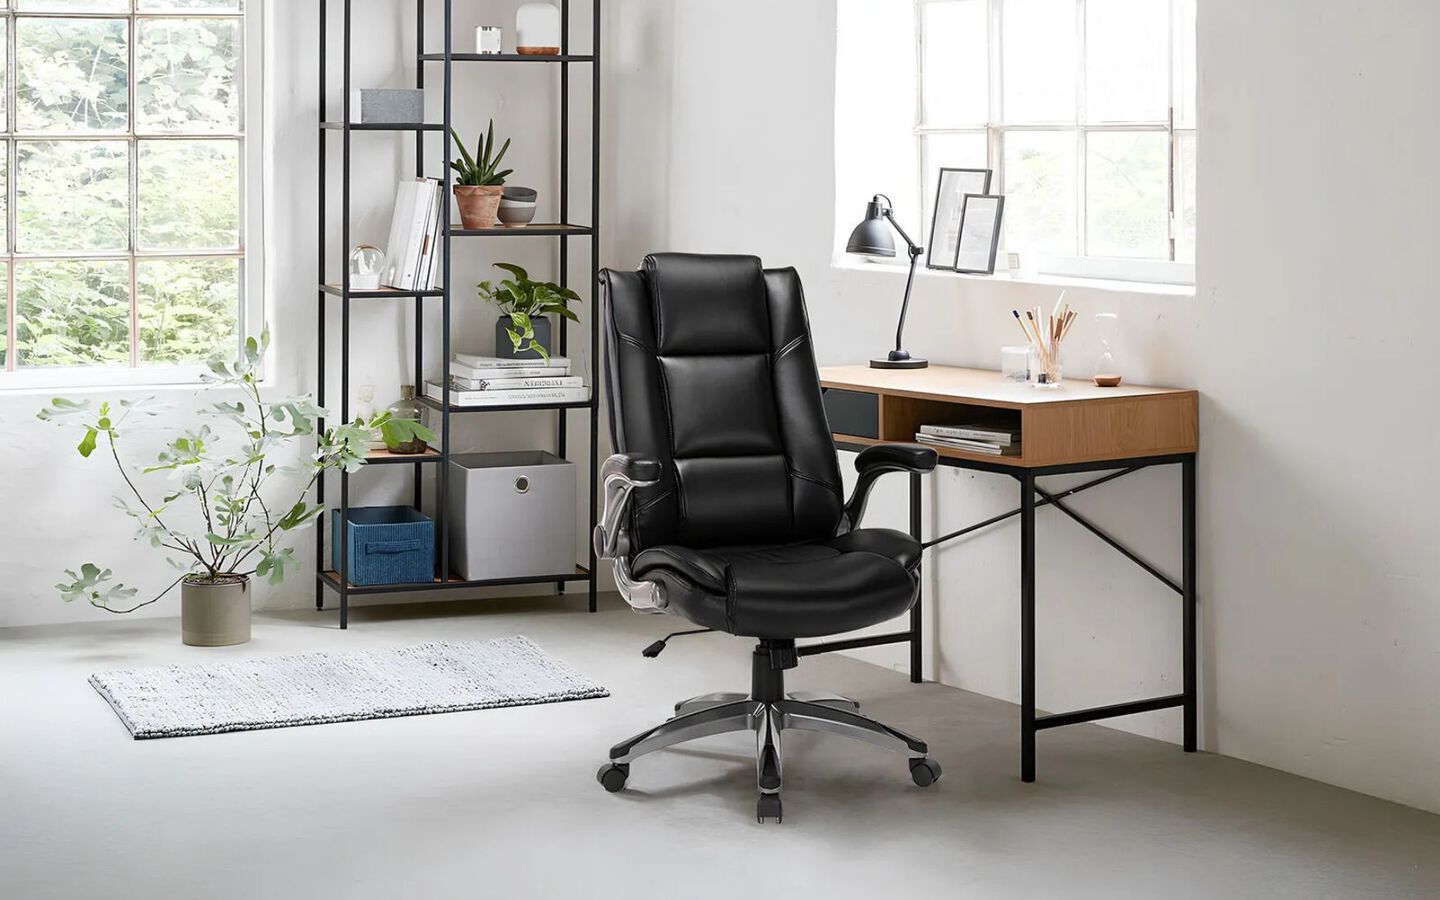 Office space with black tier shelf, brown and black desk, and a black swivel chair